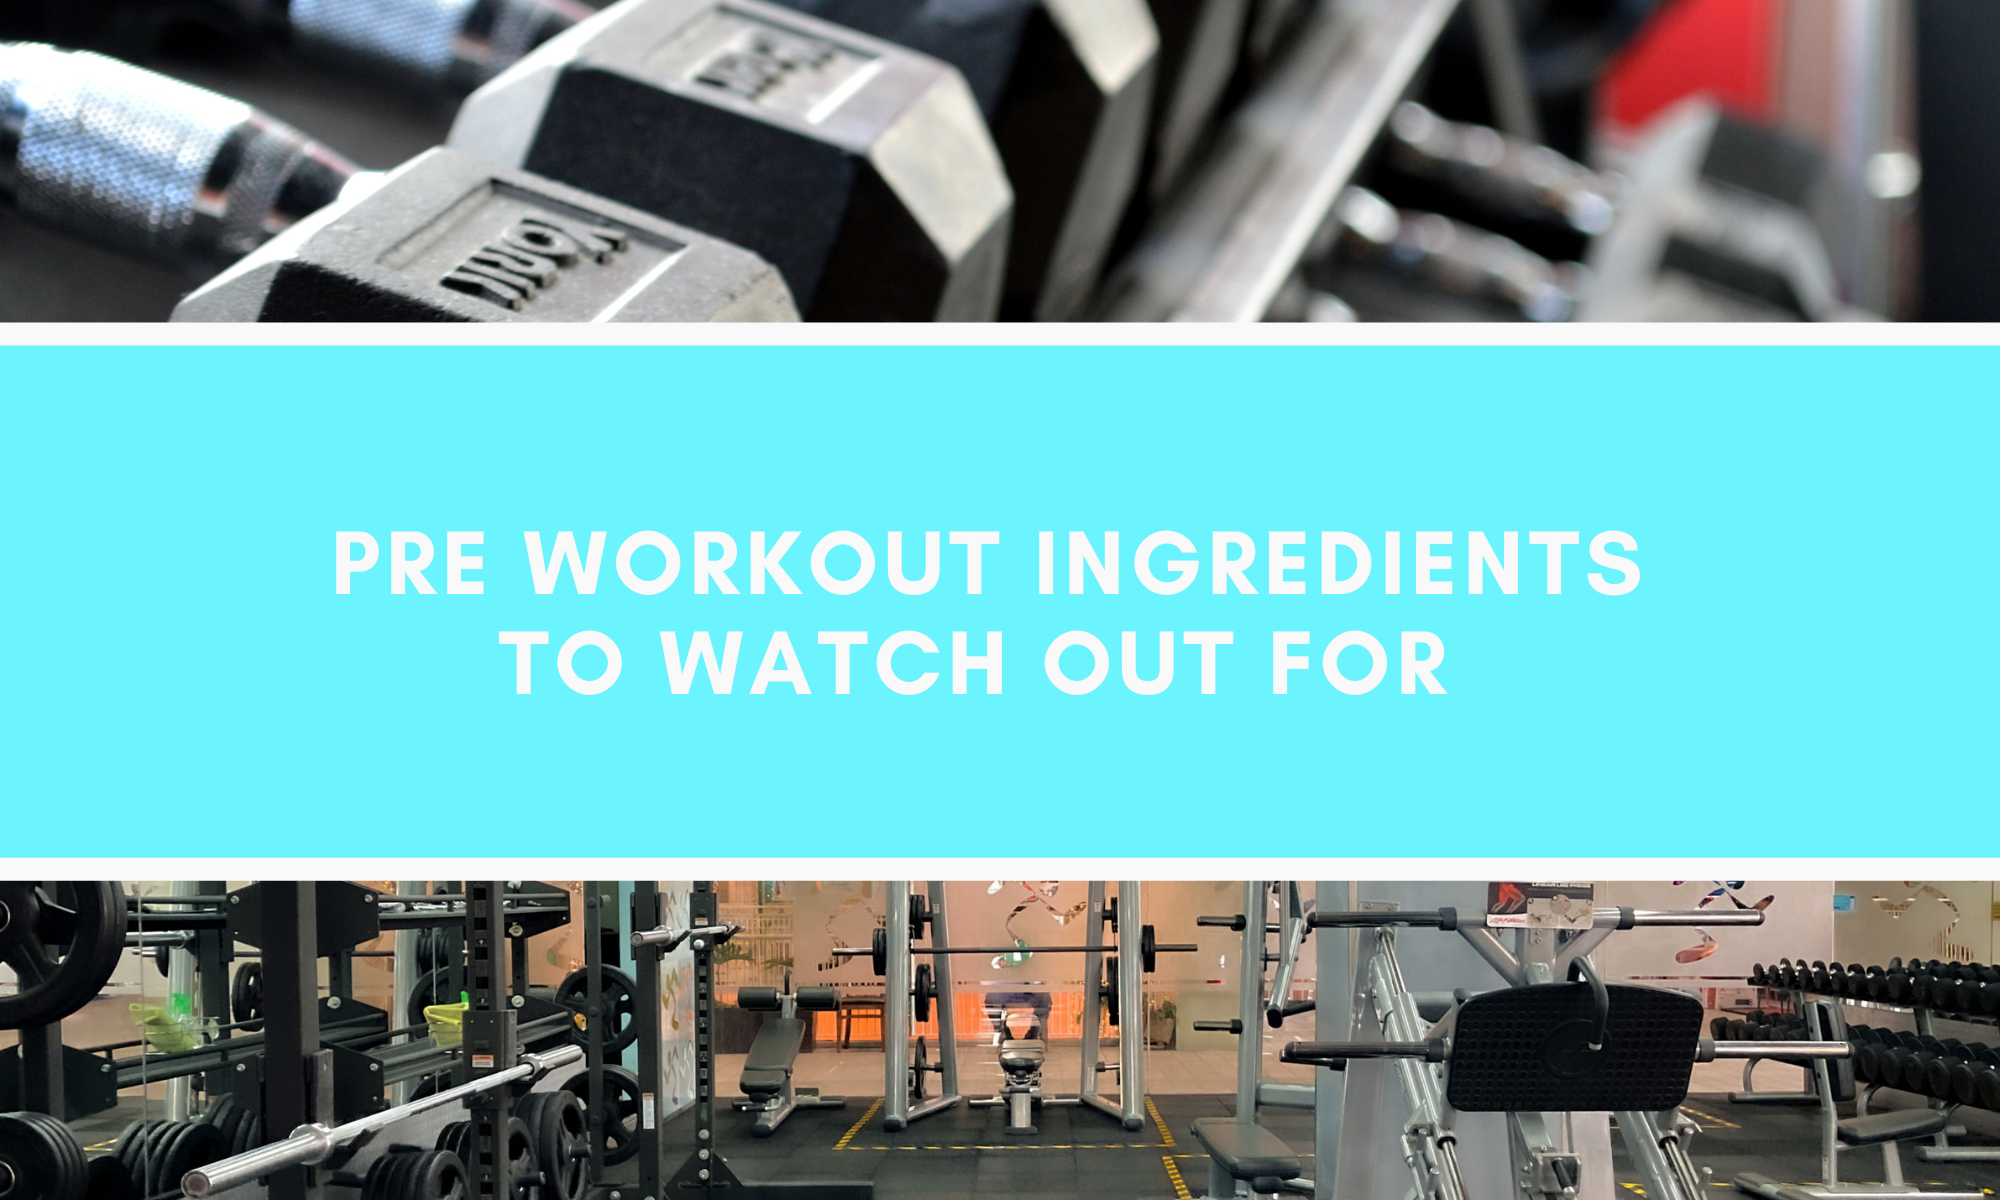 Pre Workout Ingredients to Watch Out For